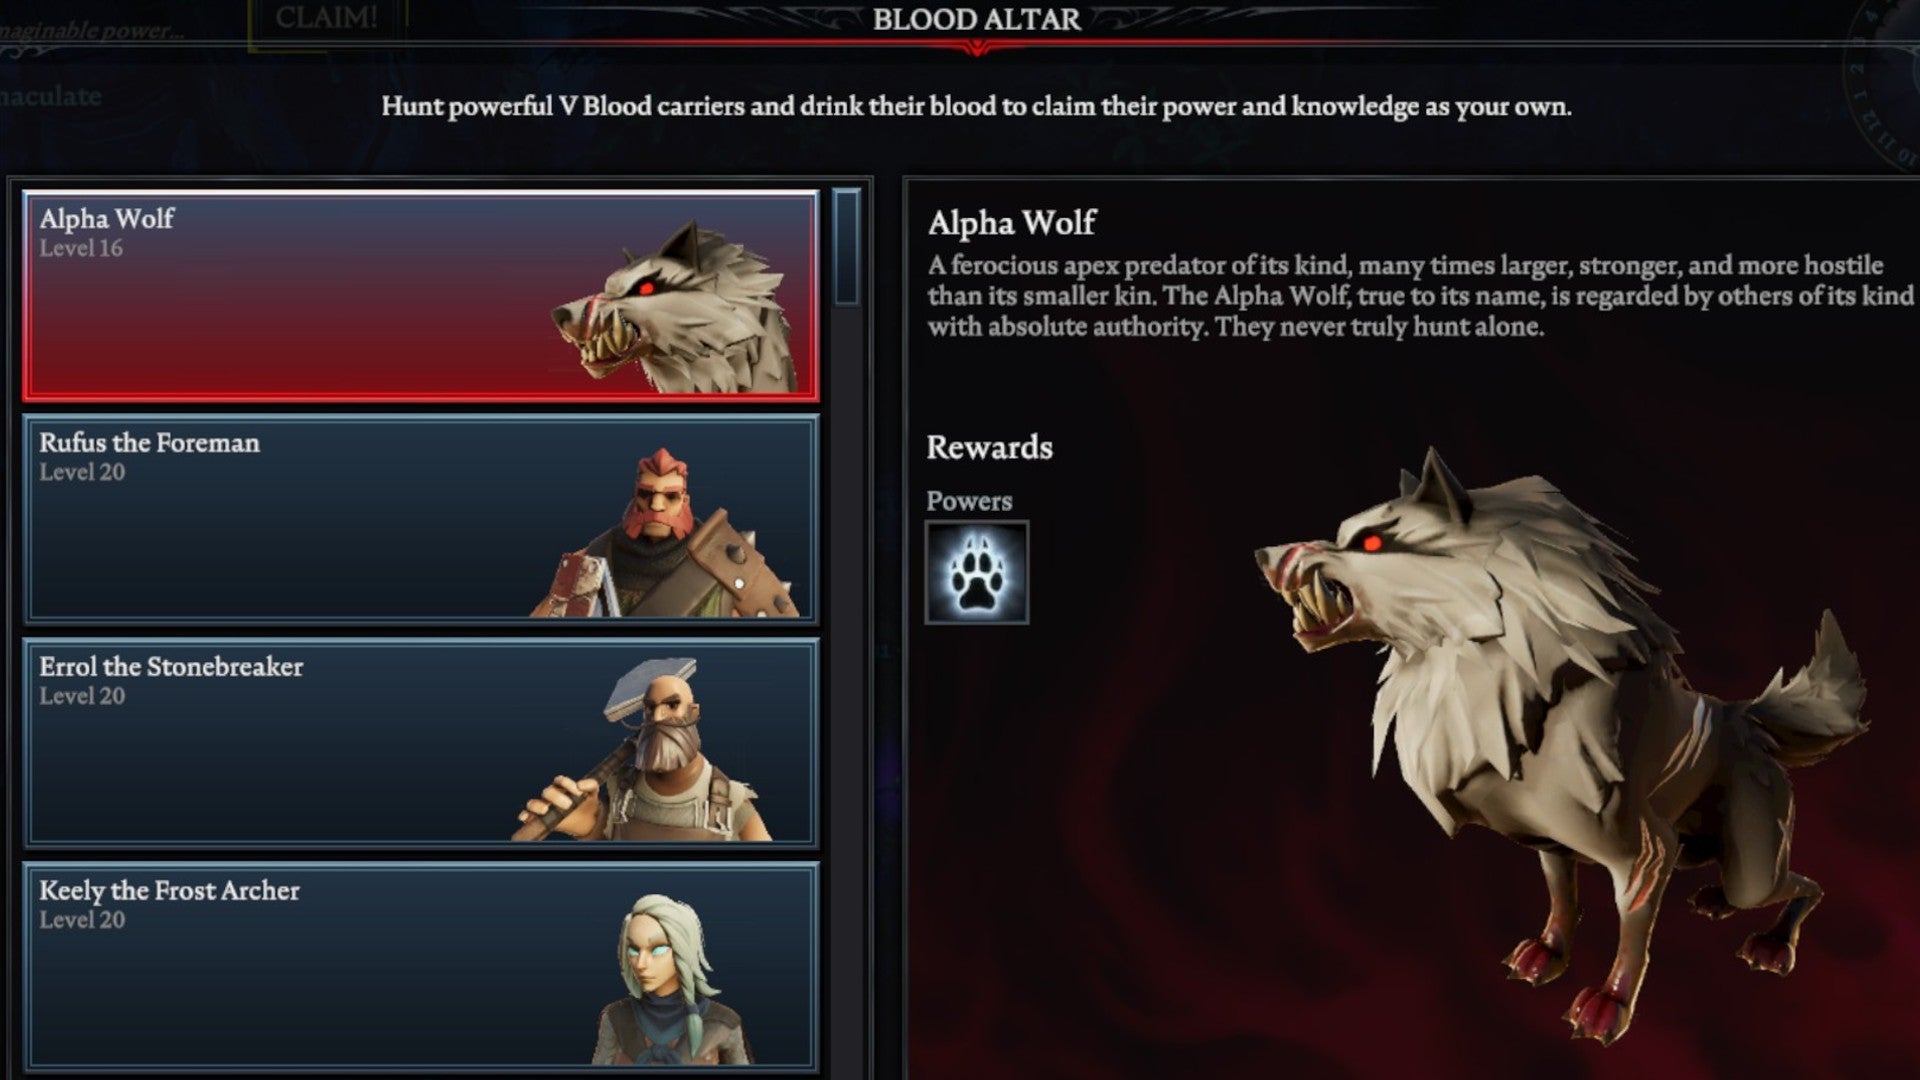 V Rising Alpha Wolf Blood Altar tracking page, showing an image of the snarling alpha wolf on the right and a list of bosses on the left